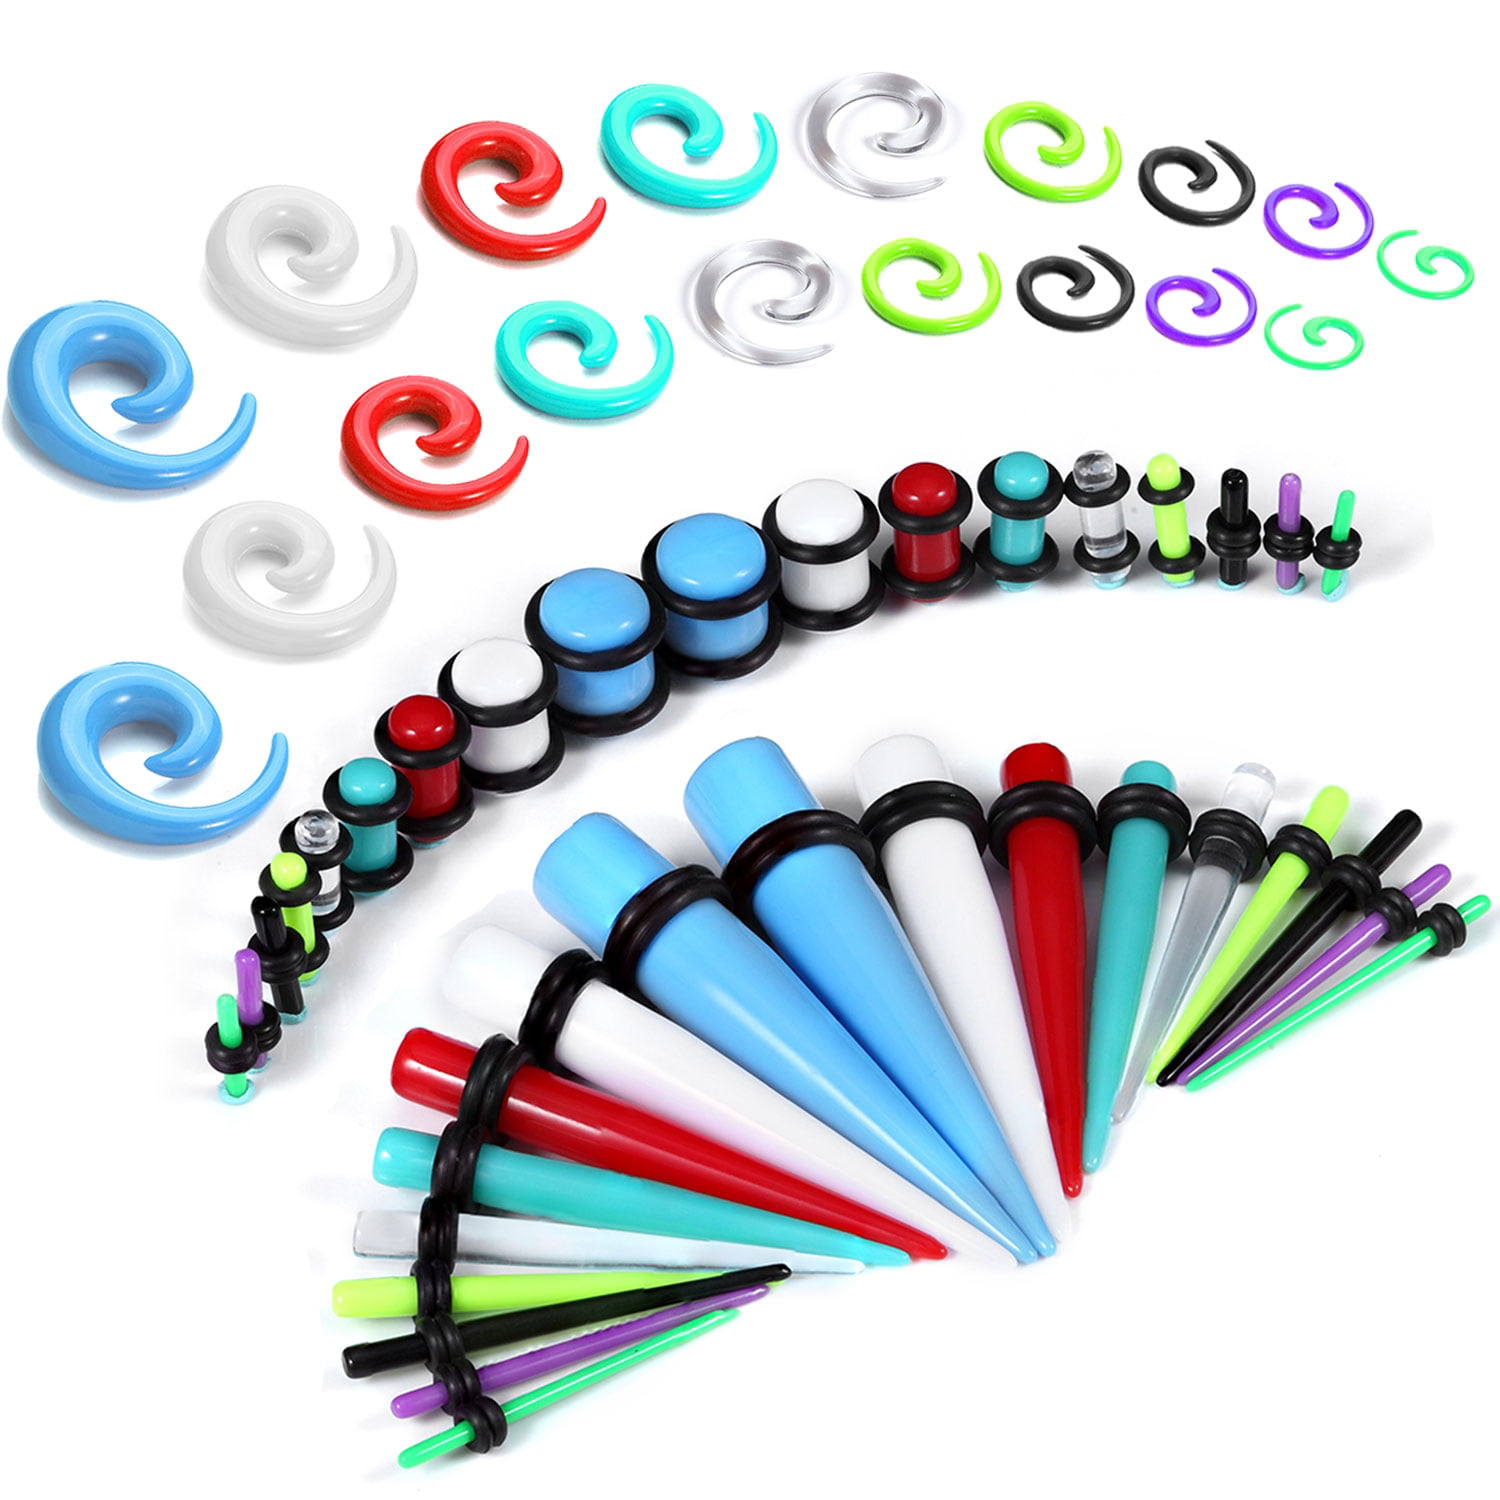 BodyJ4You 54PC Gauges Kit Ear Stretching 14G-00G Acrylic Hanger Tapers Plugs Body Piercing Set 